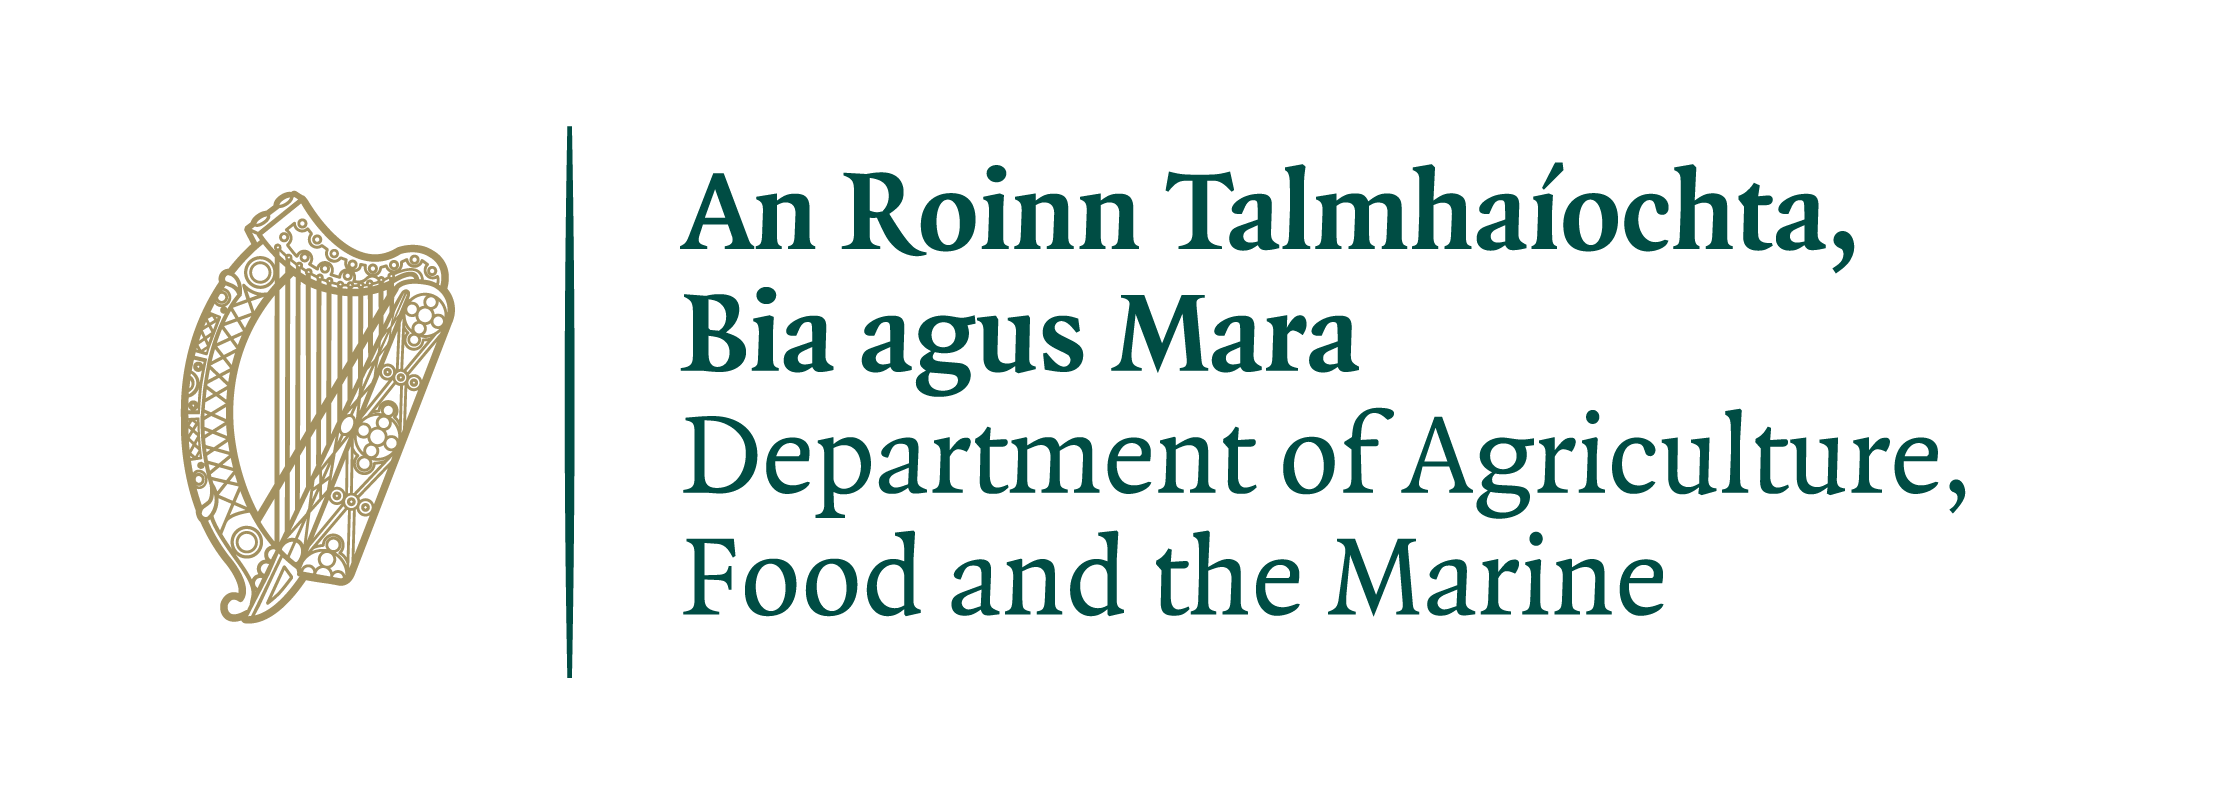 Department of Agriculture Food and the Marine logo